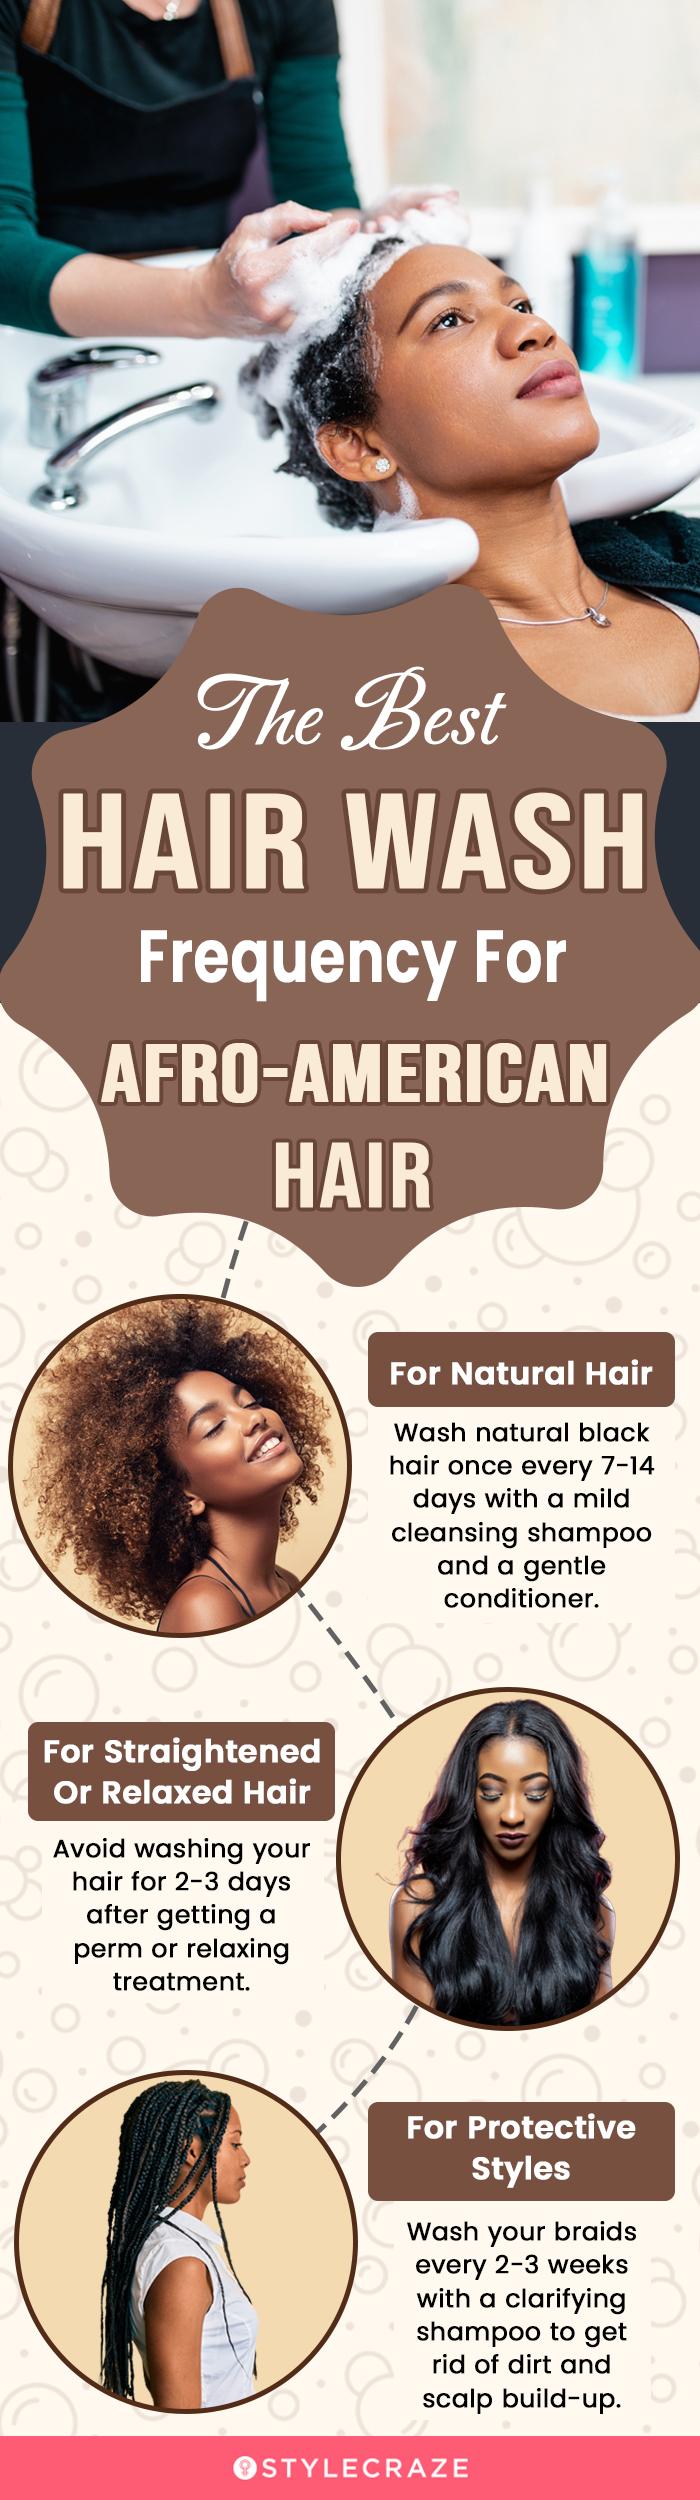 the best hair wash frequency for afroamerican hair (infographic)